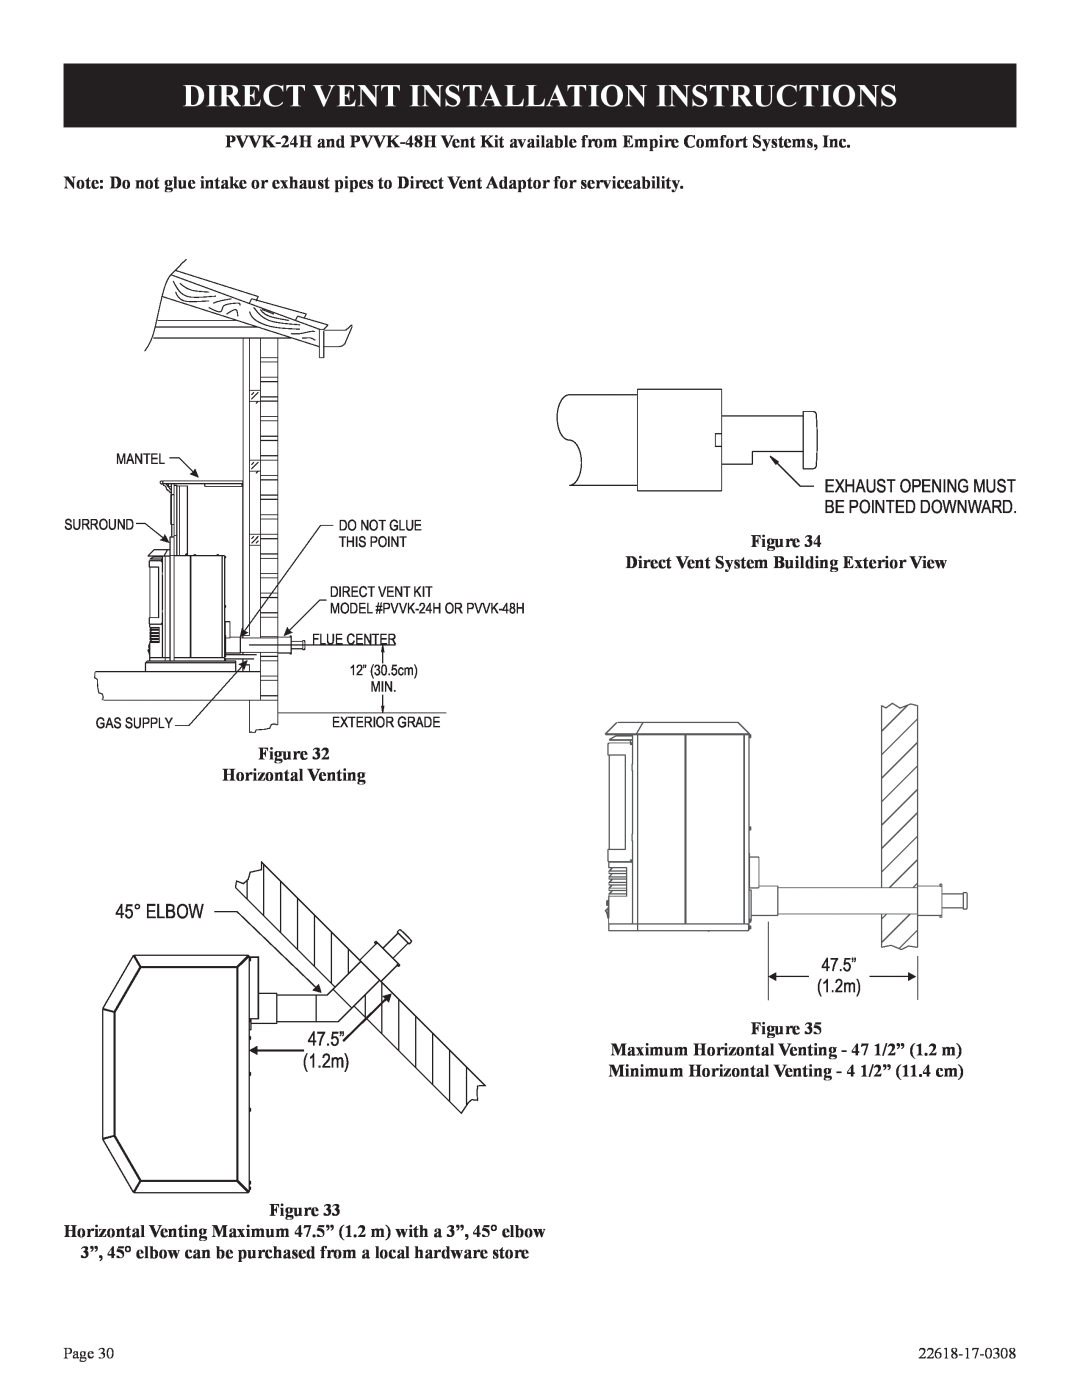 Empire Comfort Systems PV-28SV50-BN, PV-28SV55-CN, GN, CP Direct Vent Installation Instructions, ELBOW 47.5”1.2m, 47.5” 1.2m 